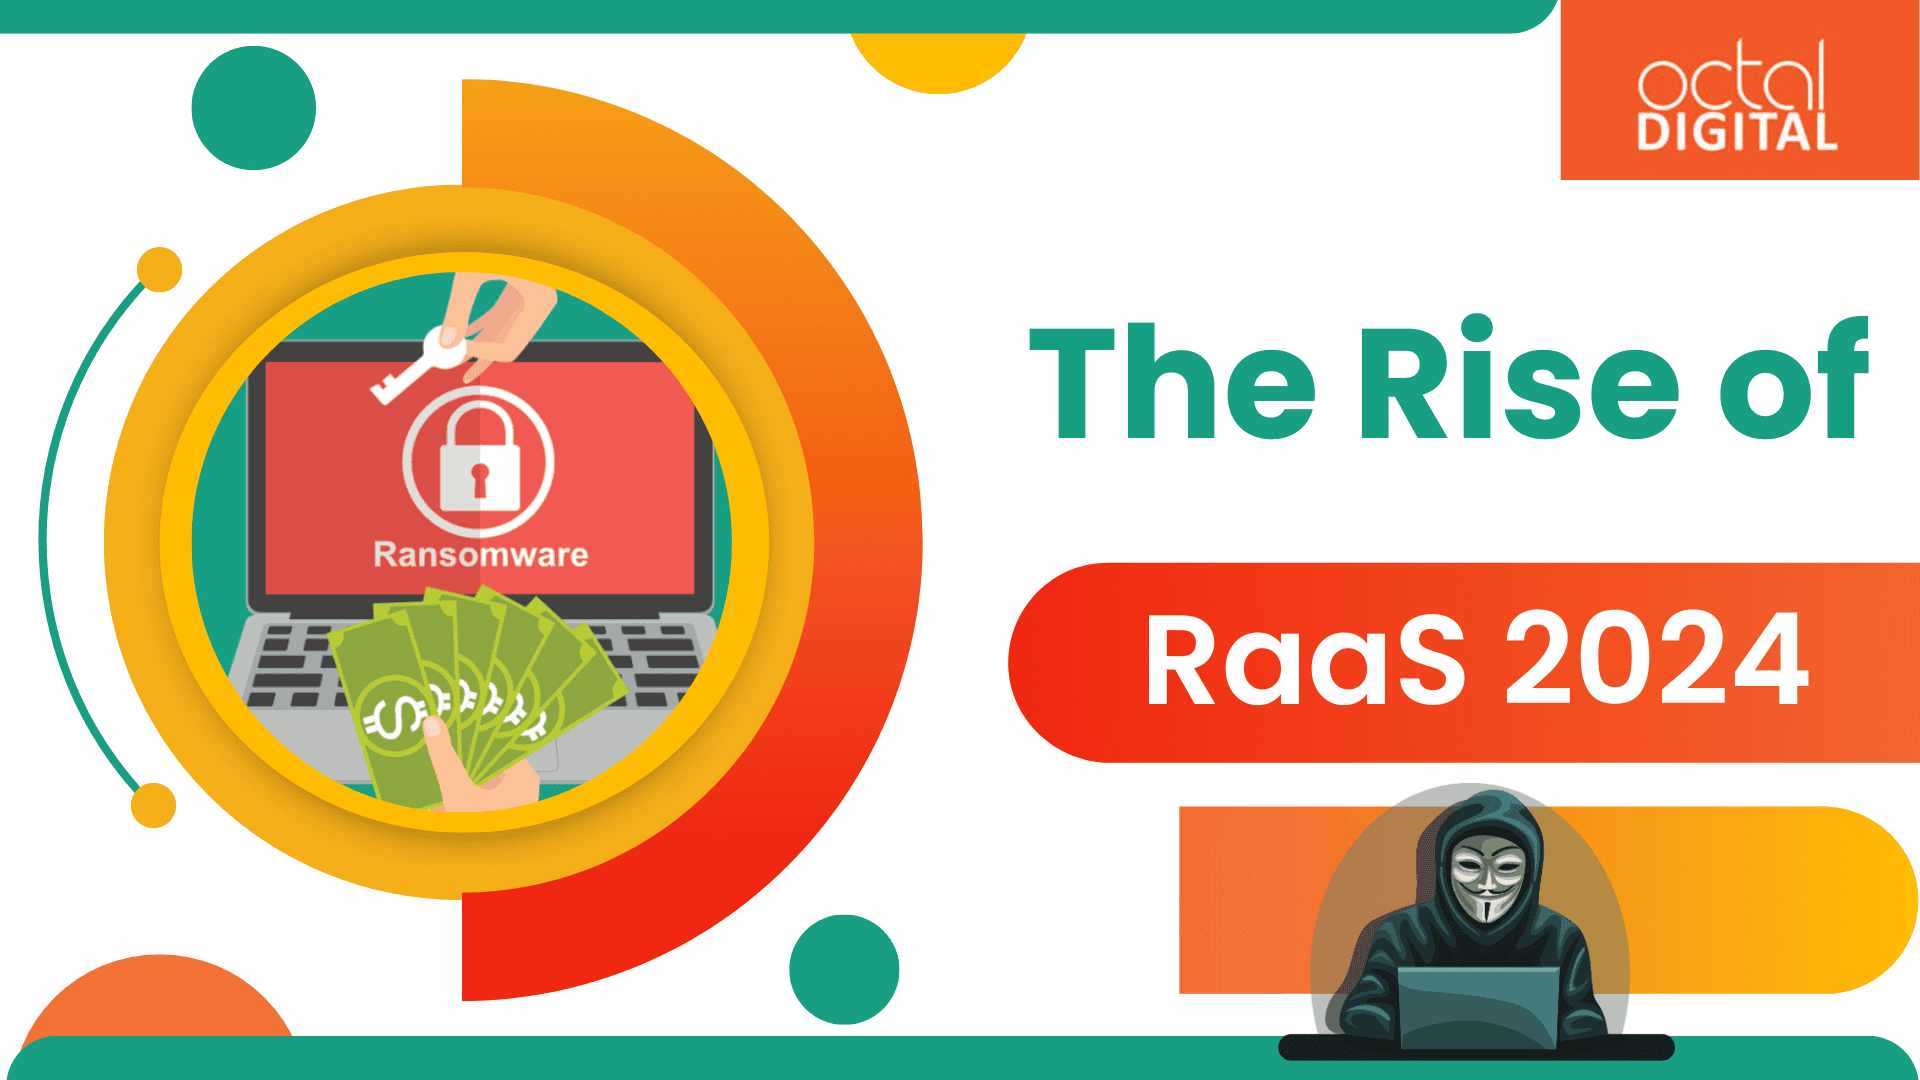 The Rise of RaaS 2024